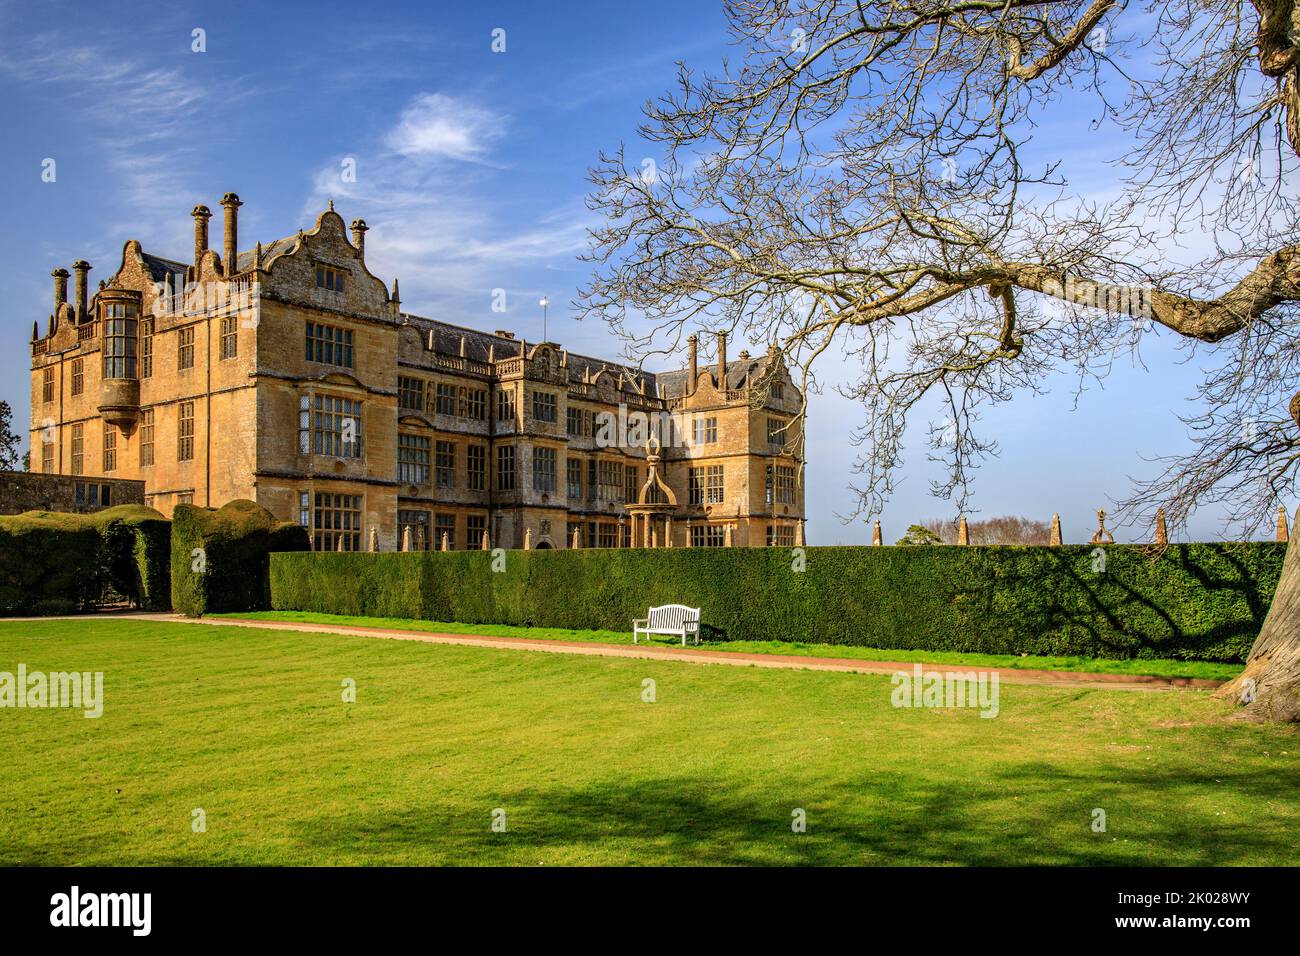 The Elizabethan architecture of the East Front of Montacute House, Somerset, England, UK Stock Photo